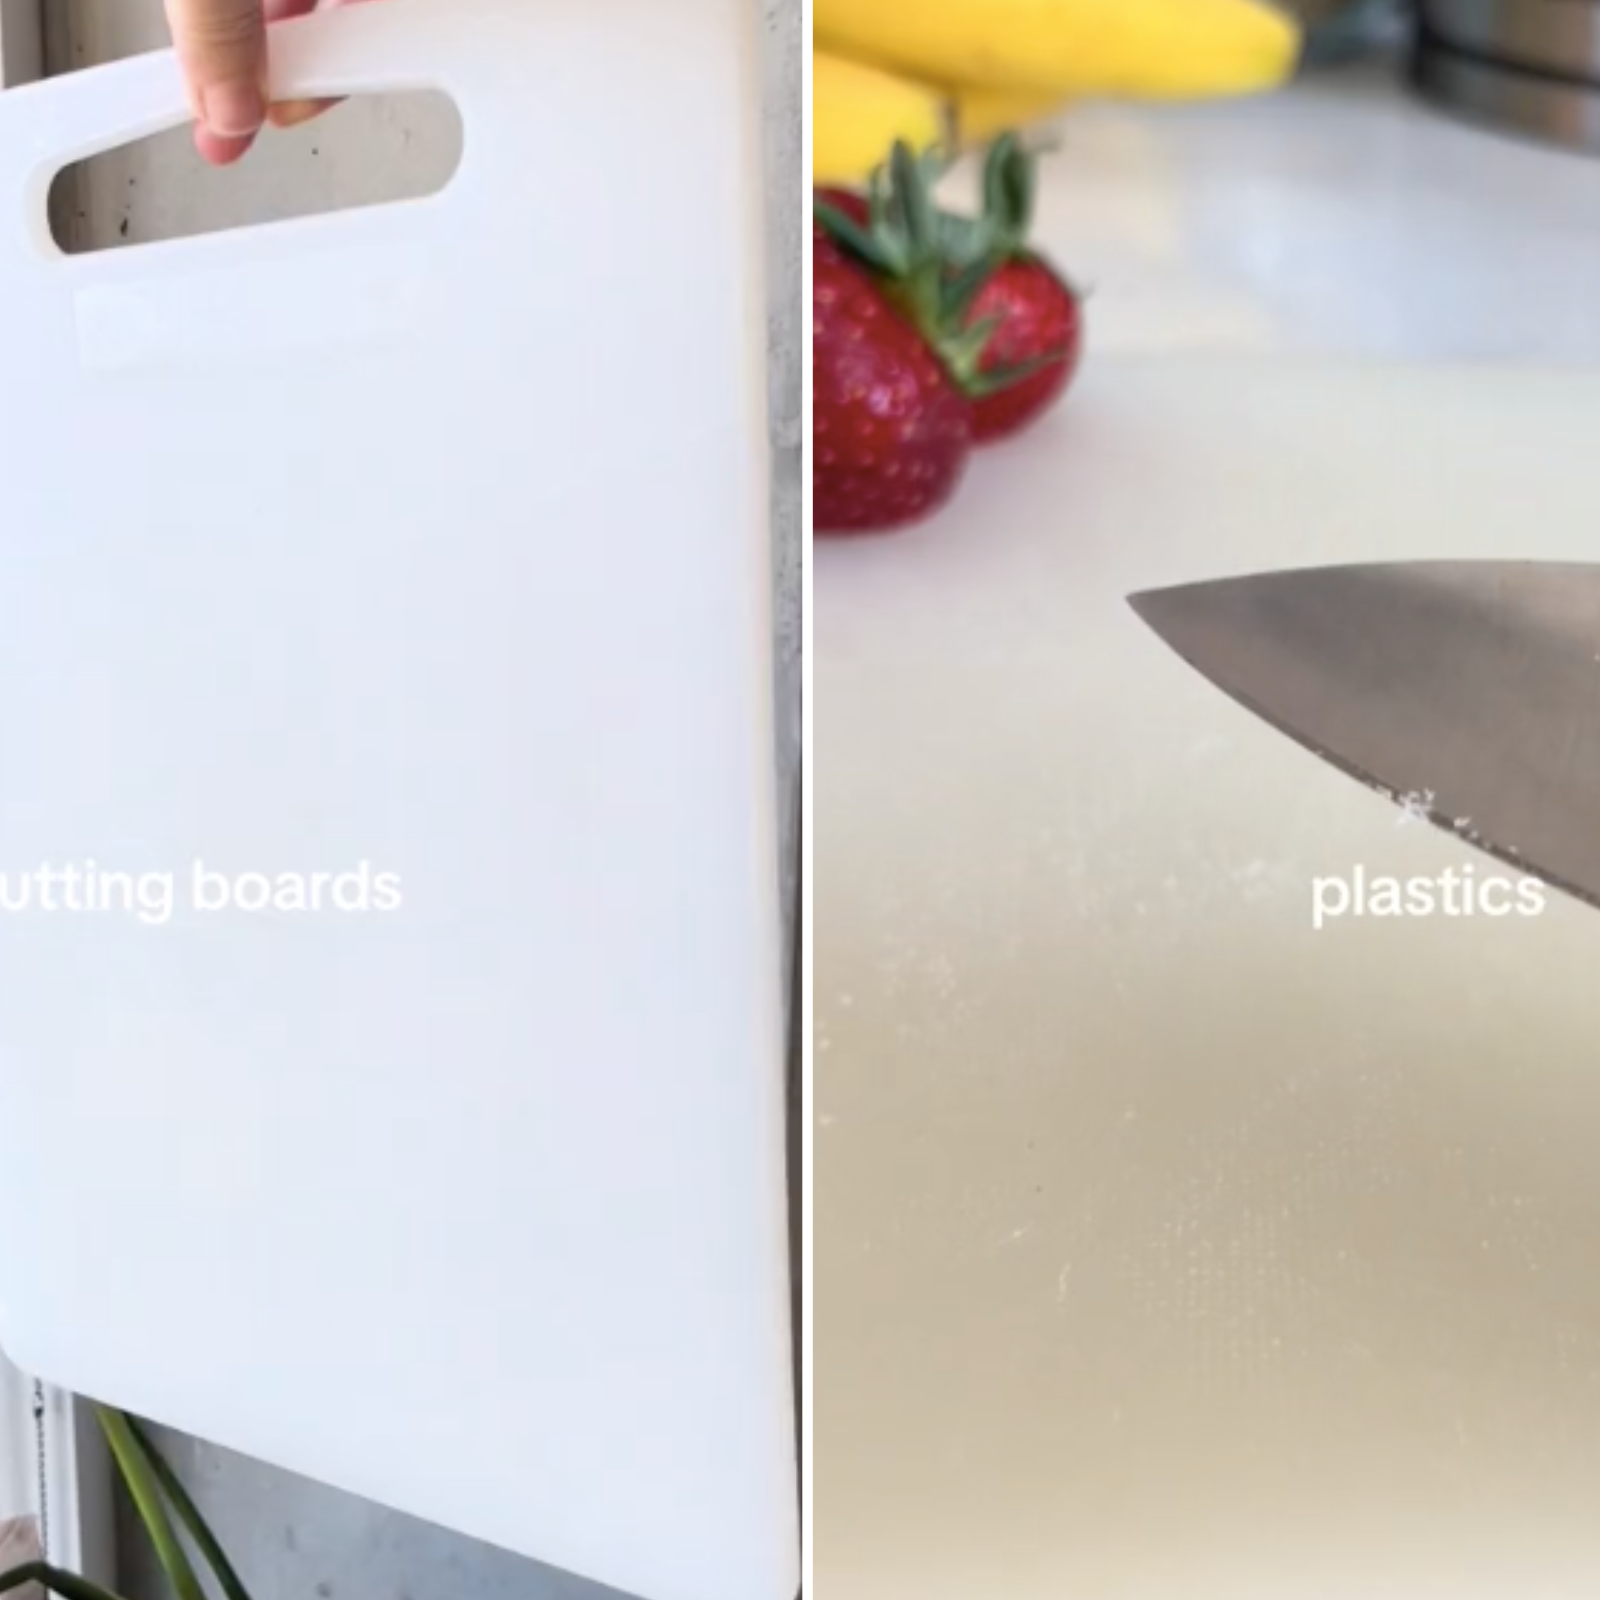 Are Plastic Cutting Boards Safe? An Expert Weighs In